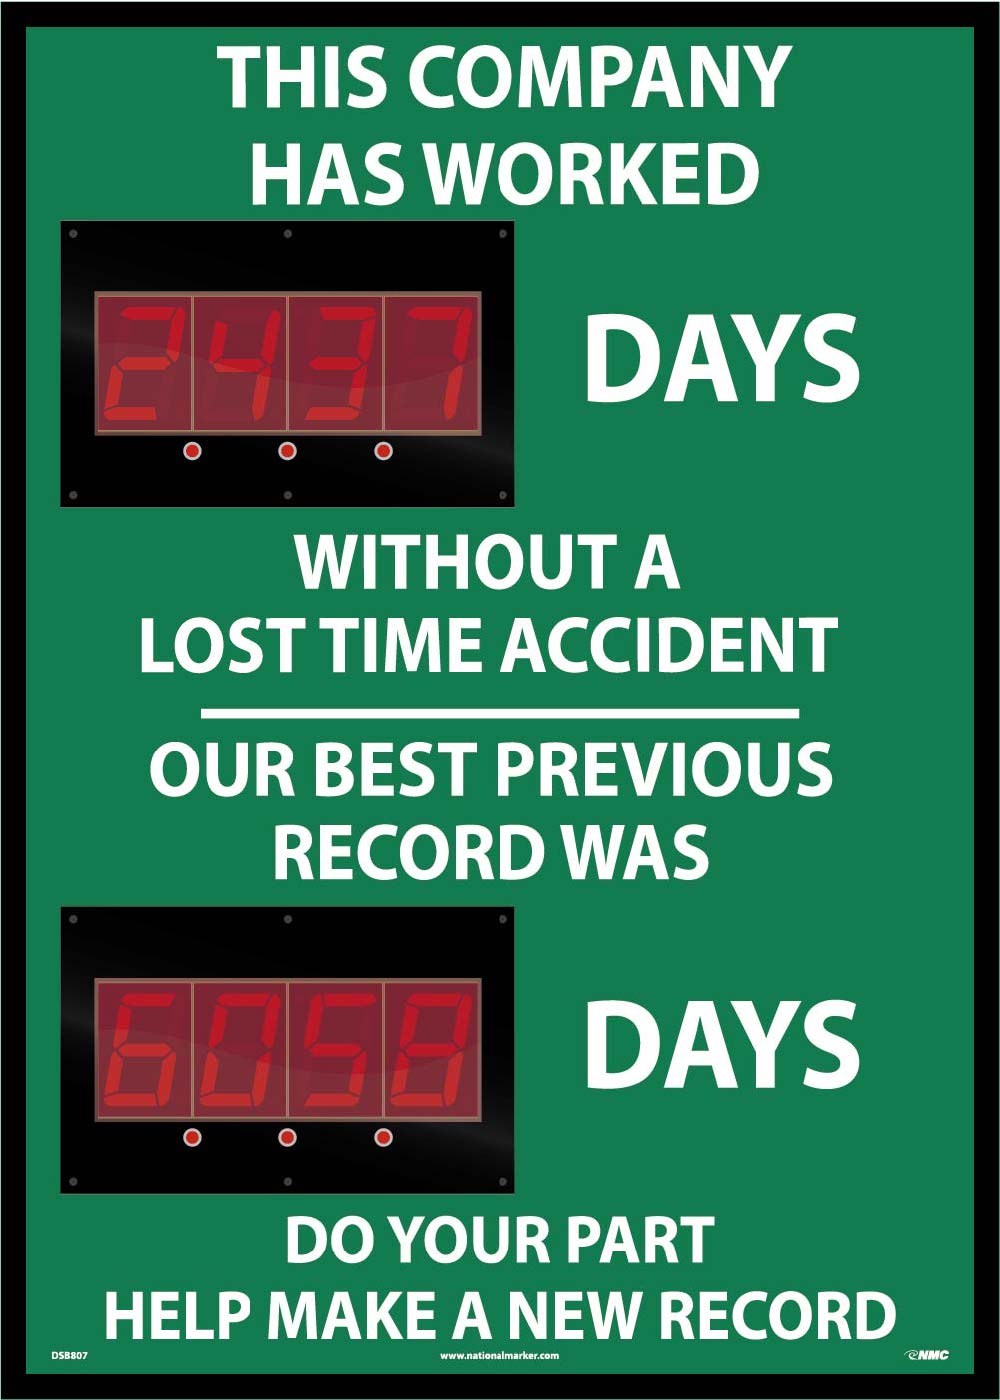 This Company Has Worked Days Without A Lost Time 2 Led Scoreboard-eSafety Supplies, Inc